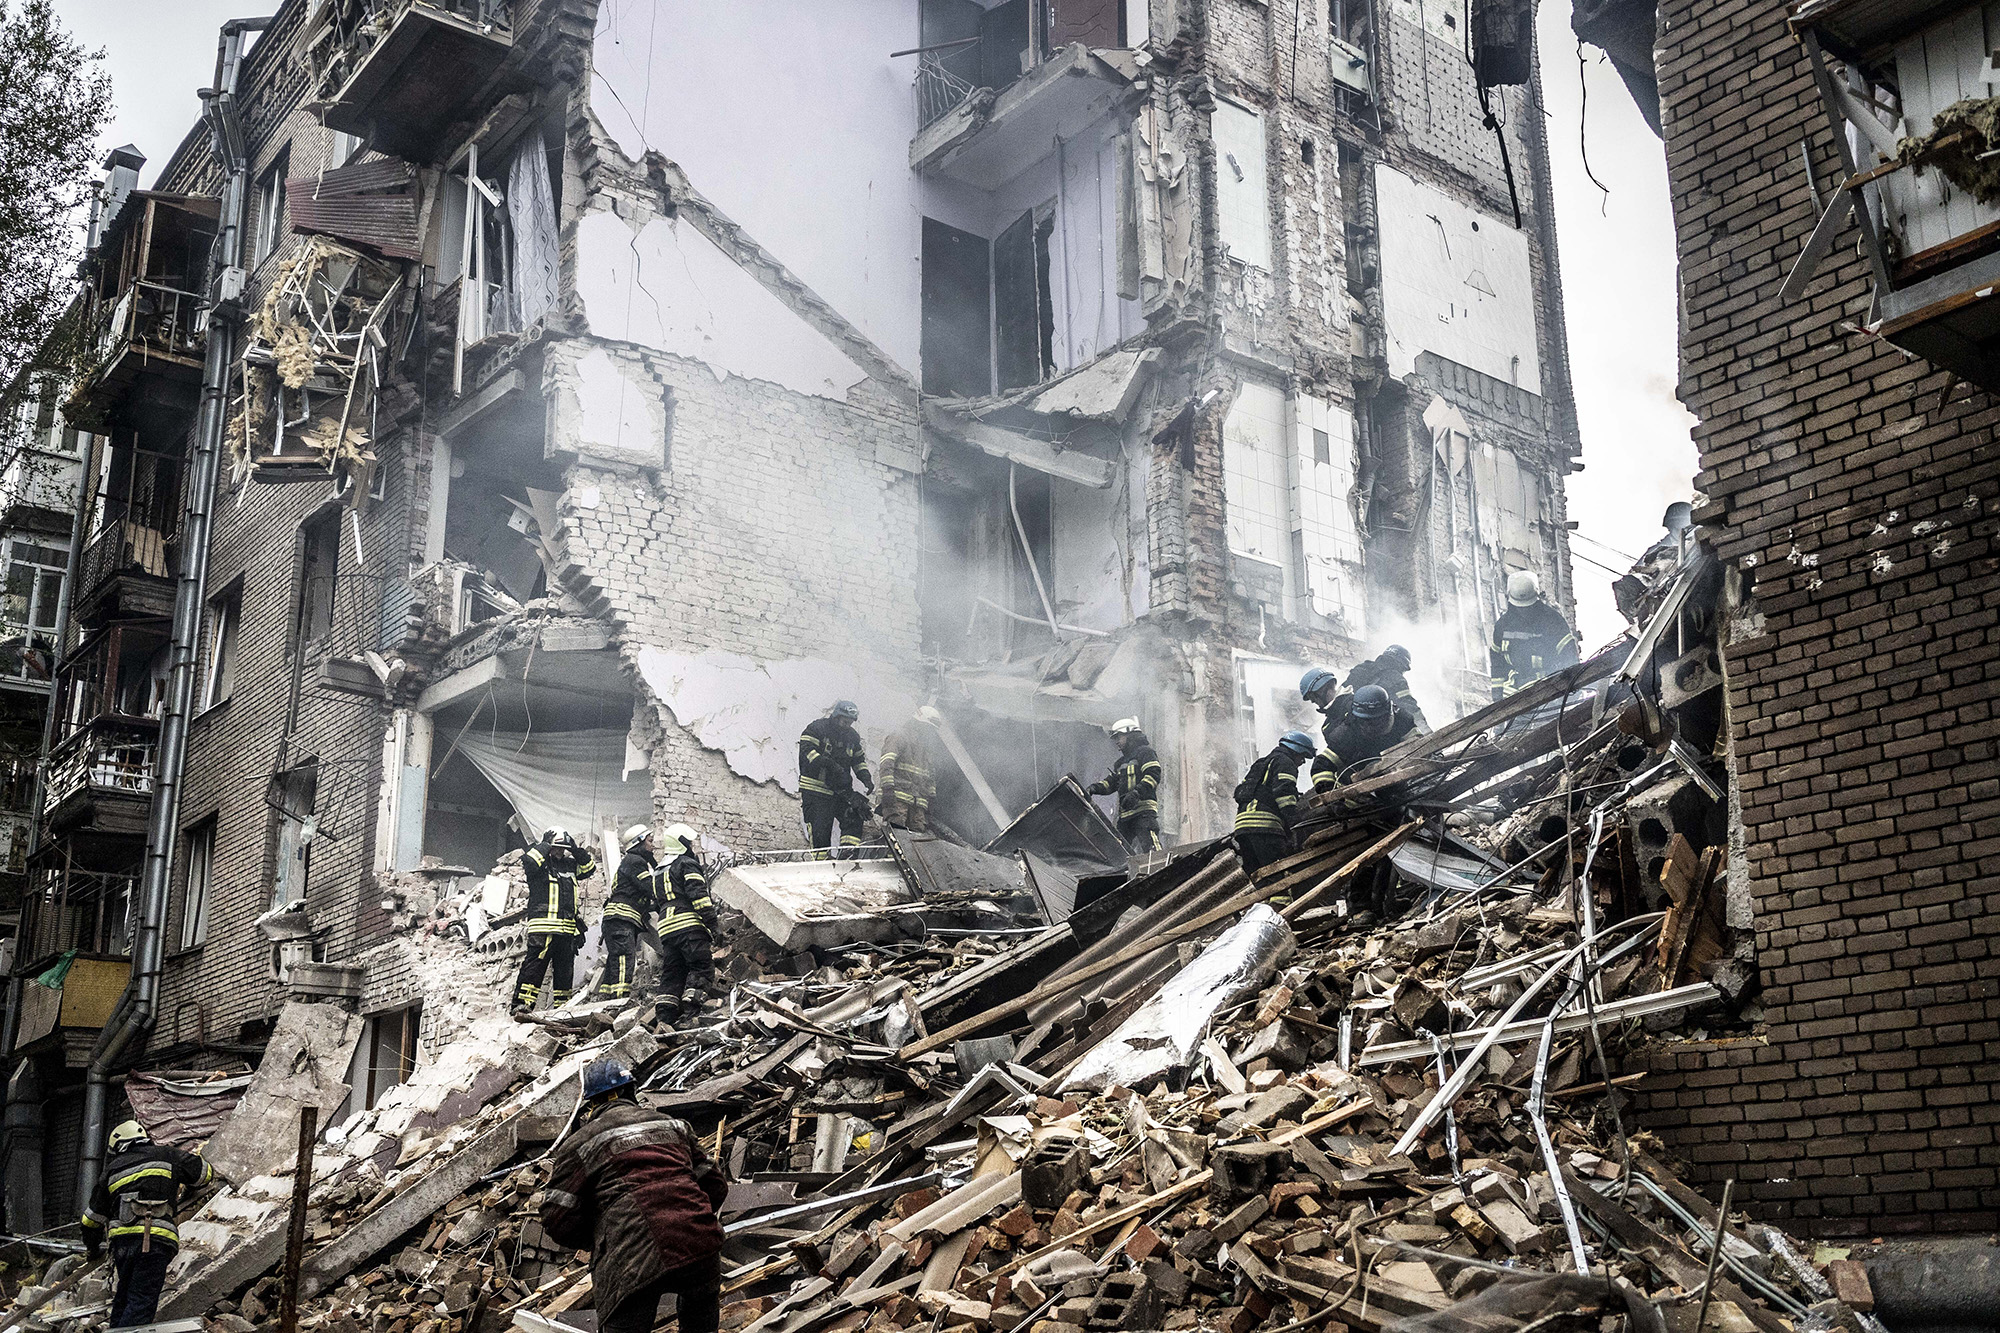 Firefighters conduct work in a damaged building after a Russian missile attack in Zaporizhzhia, Ukraine on October 10.